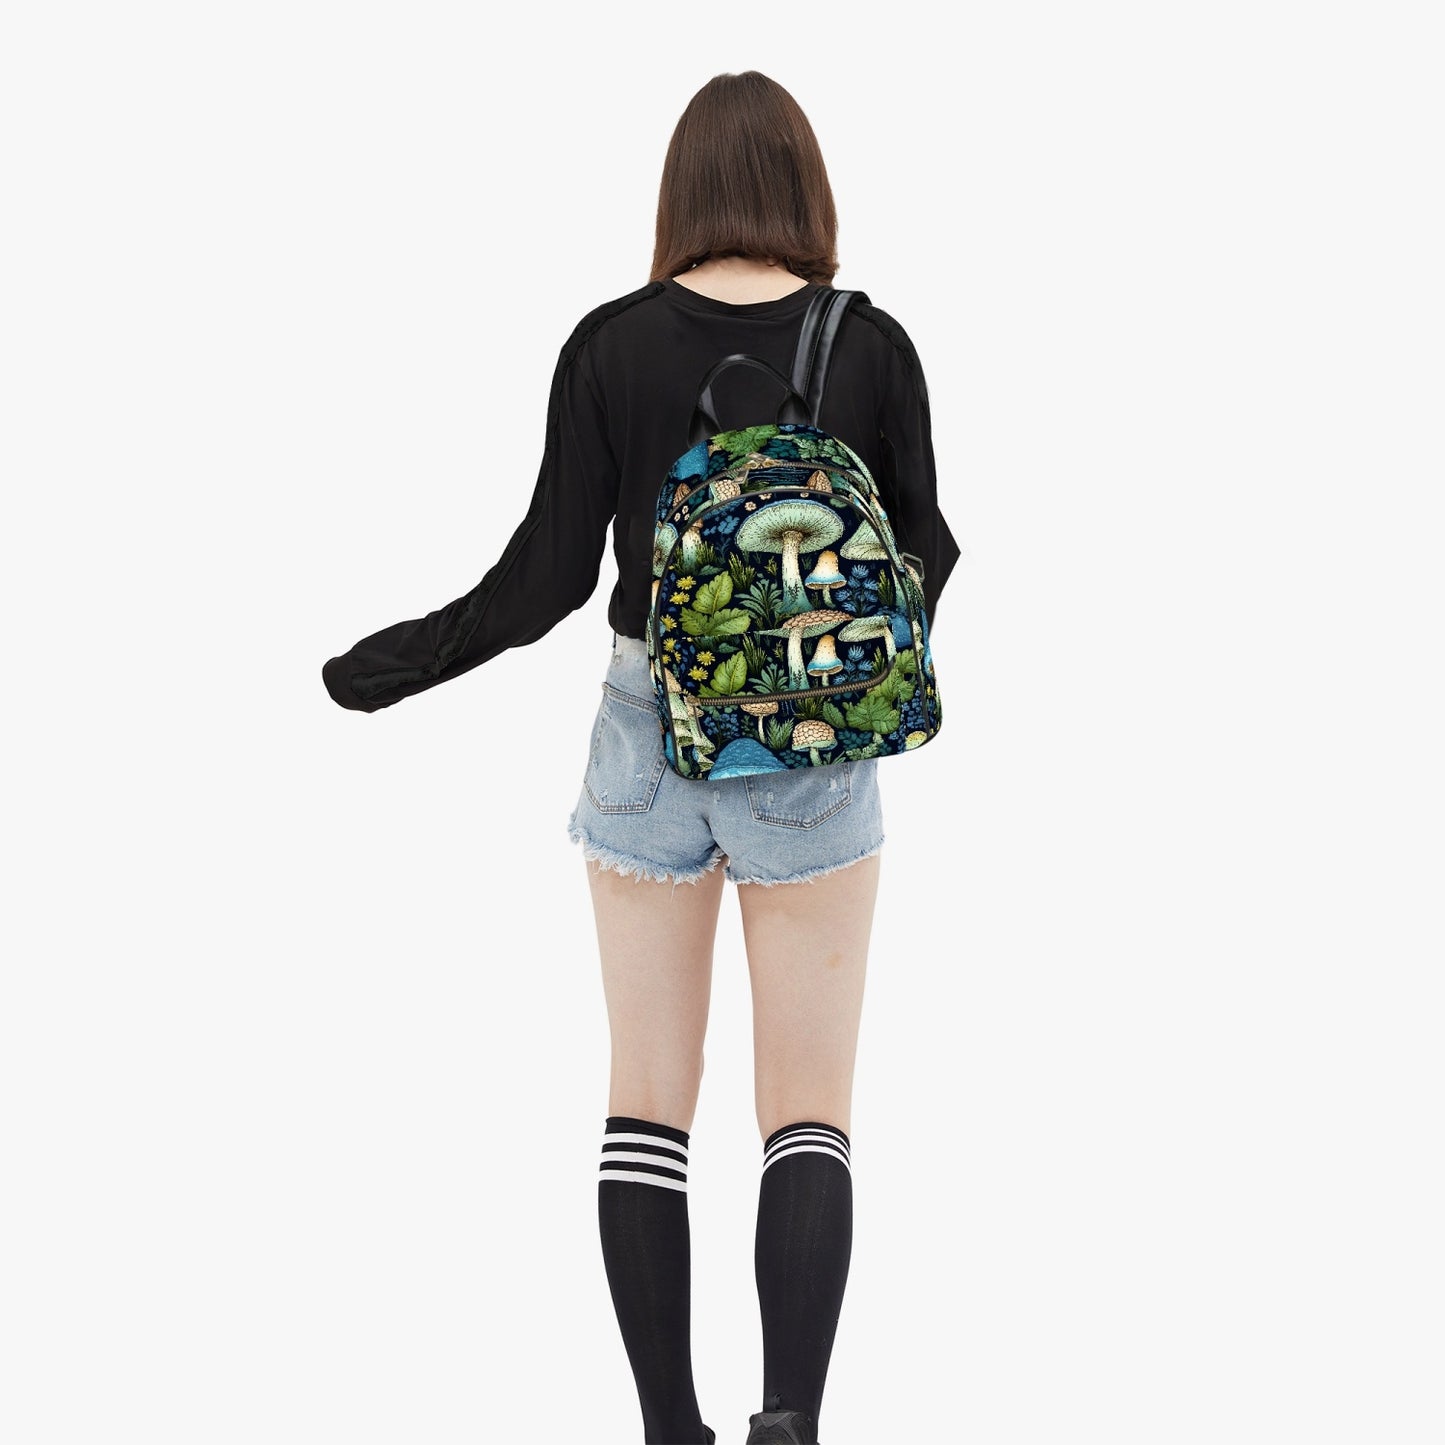 Mushroom Core Green and Blue Forest Small Back Pack (JPBPMGB1)